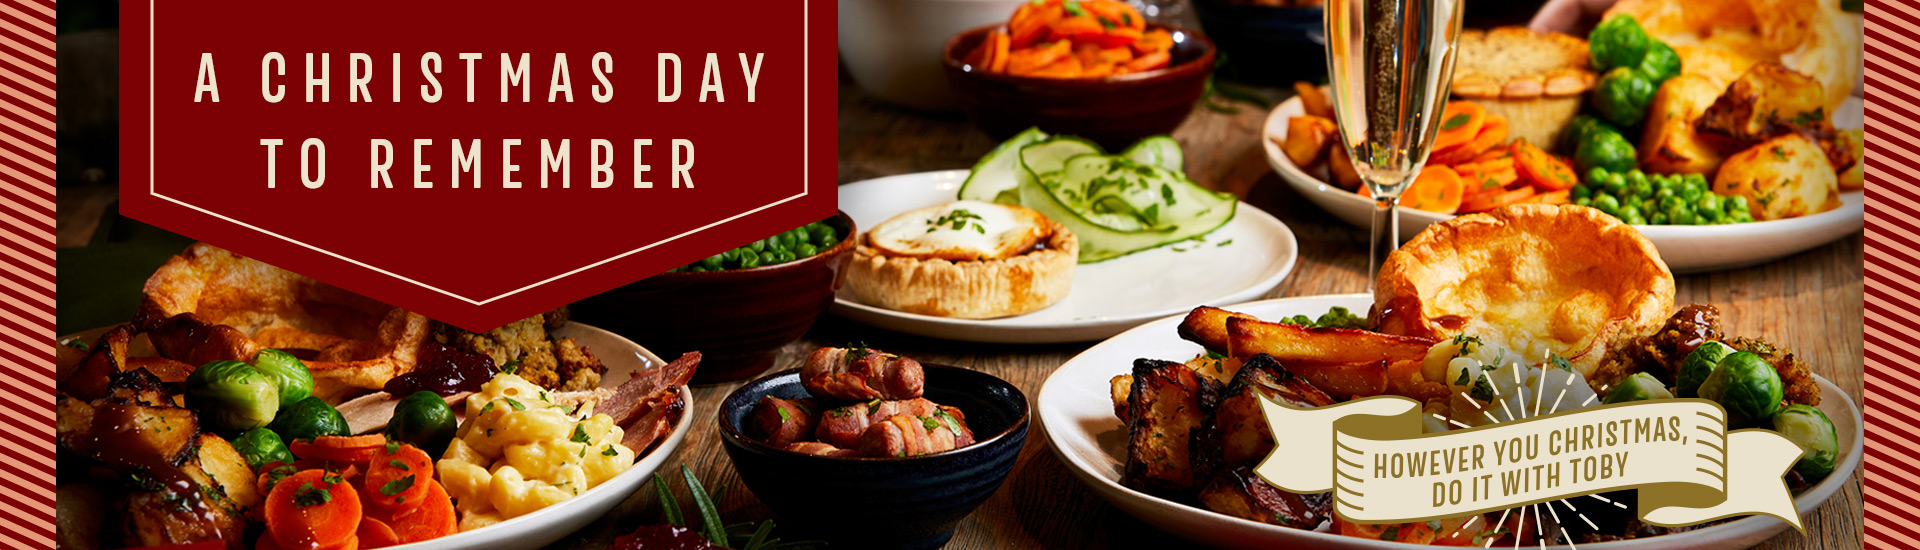 Christmas Day menu at Toby Carvery Loughborough